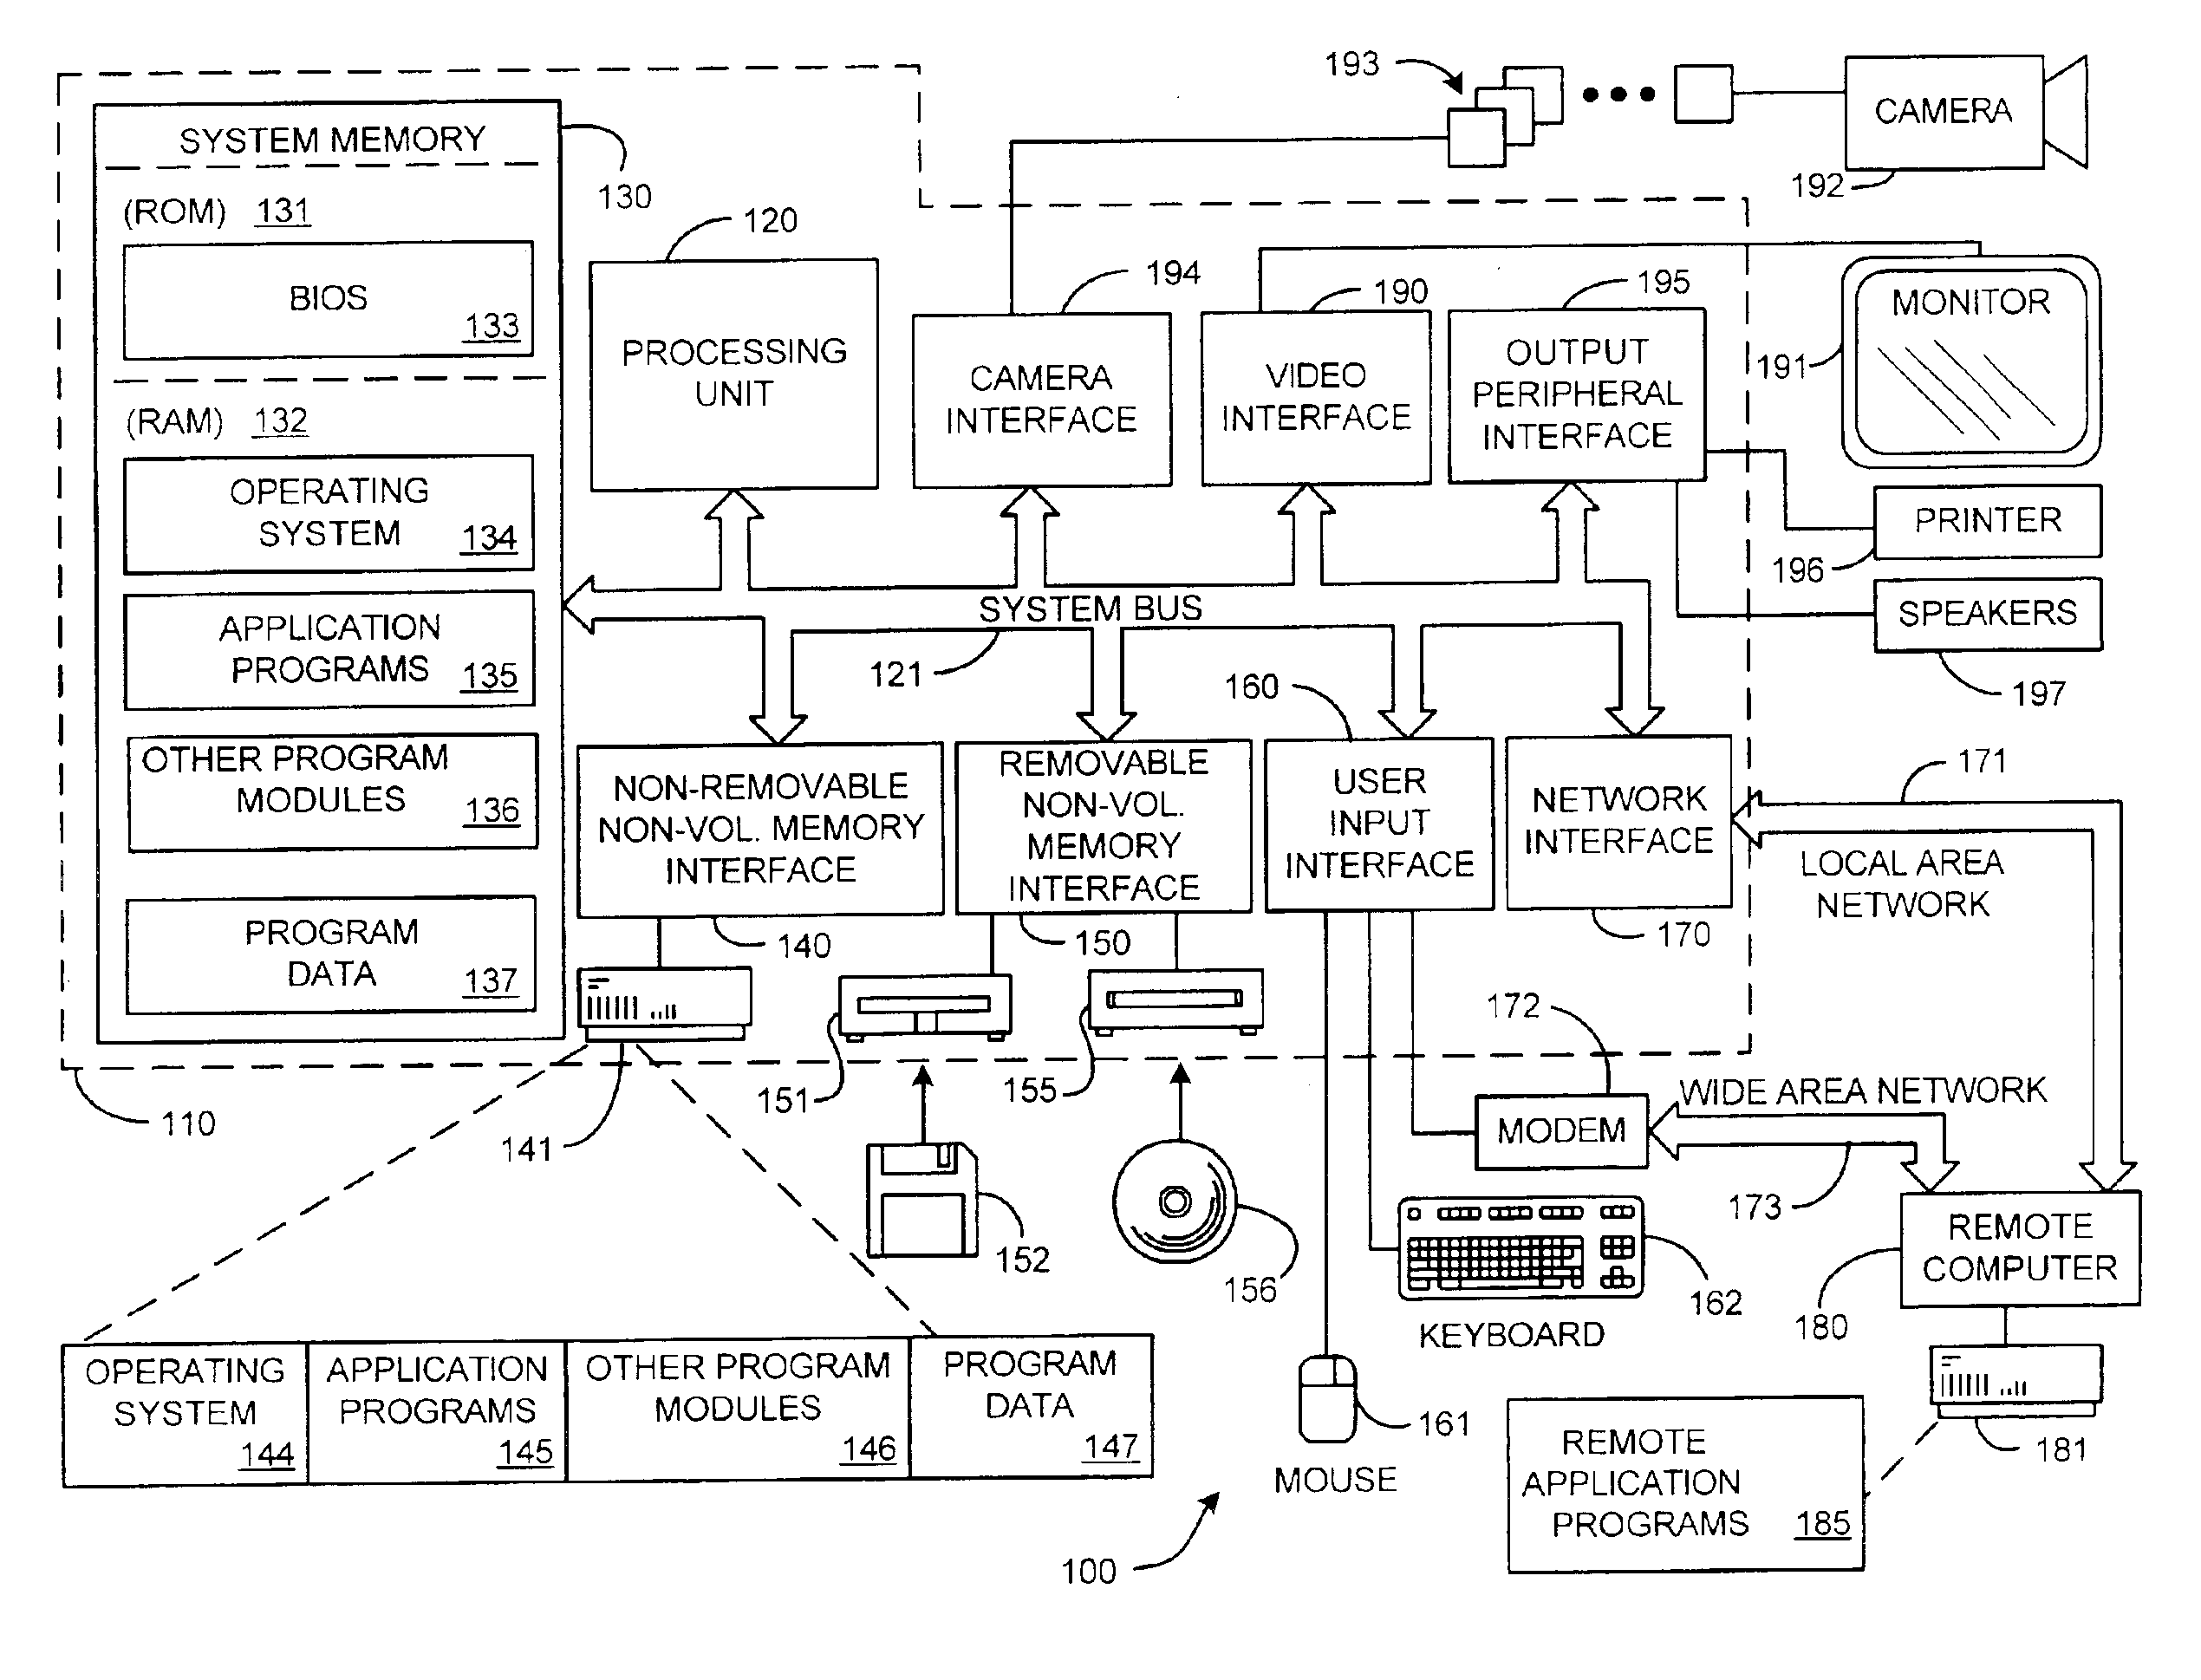 System and process for generating high dynamic range video